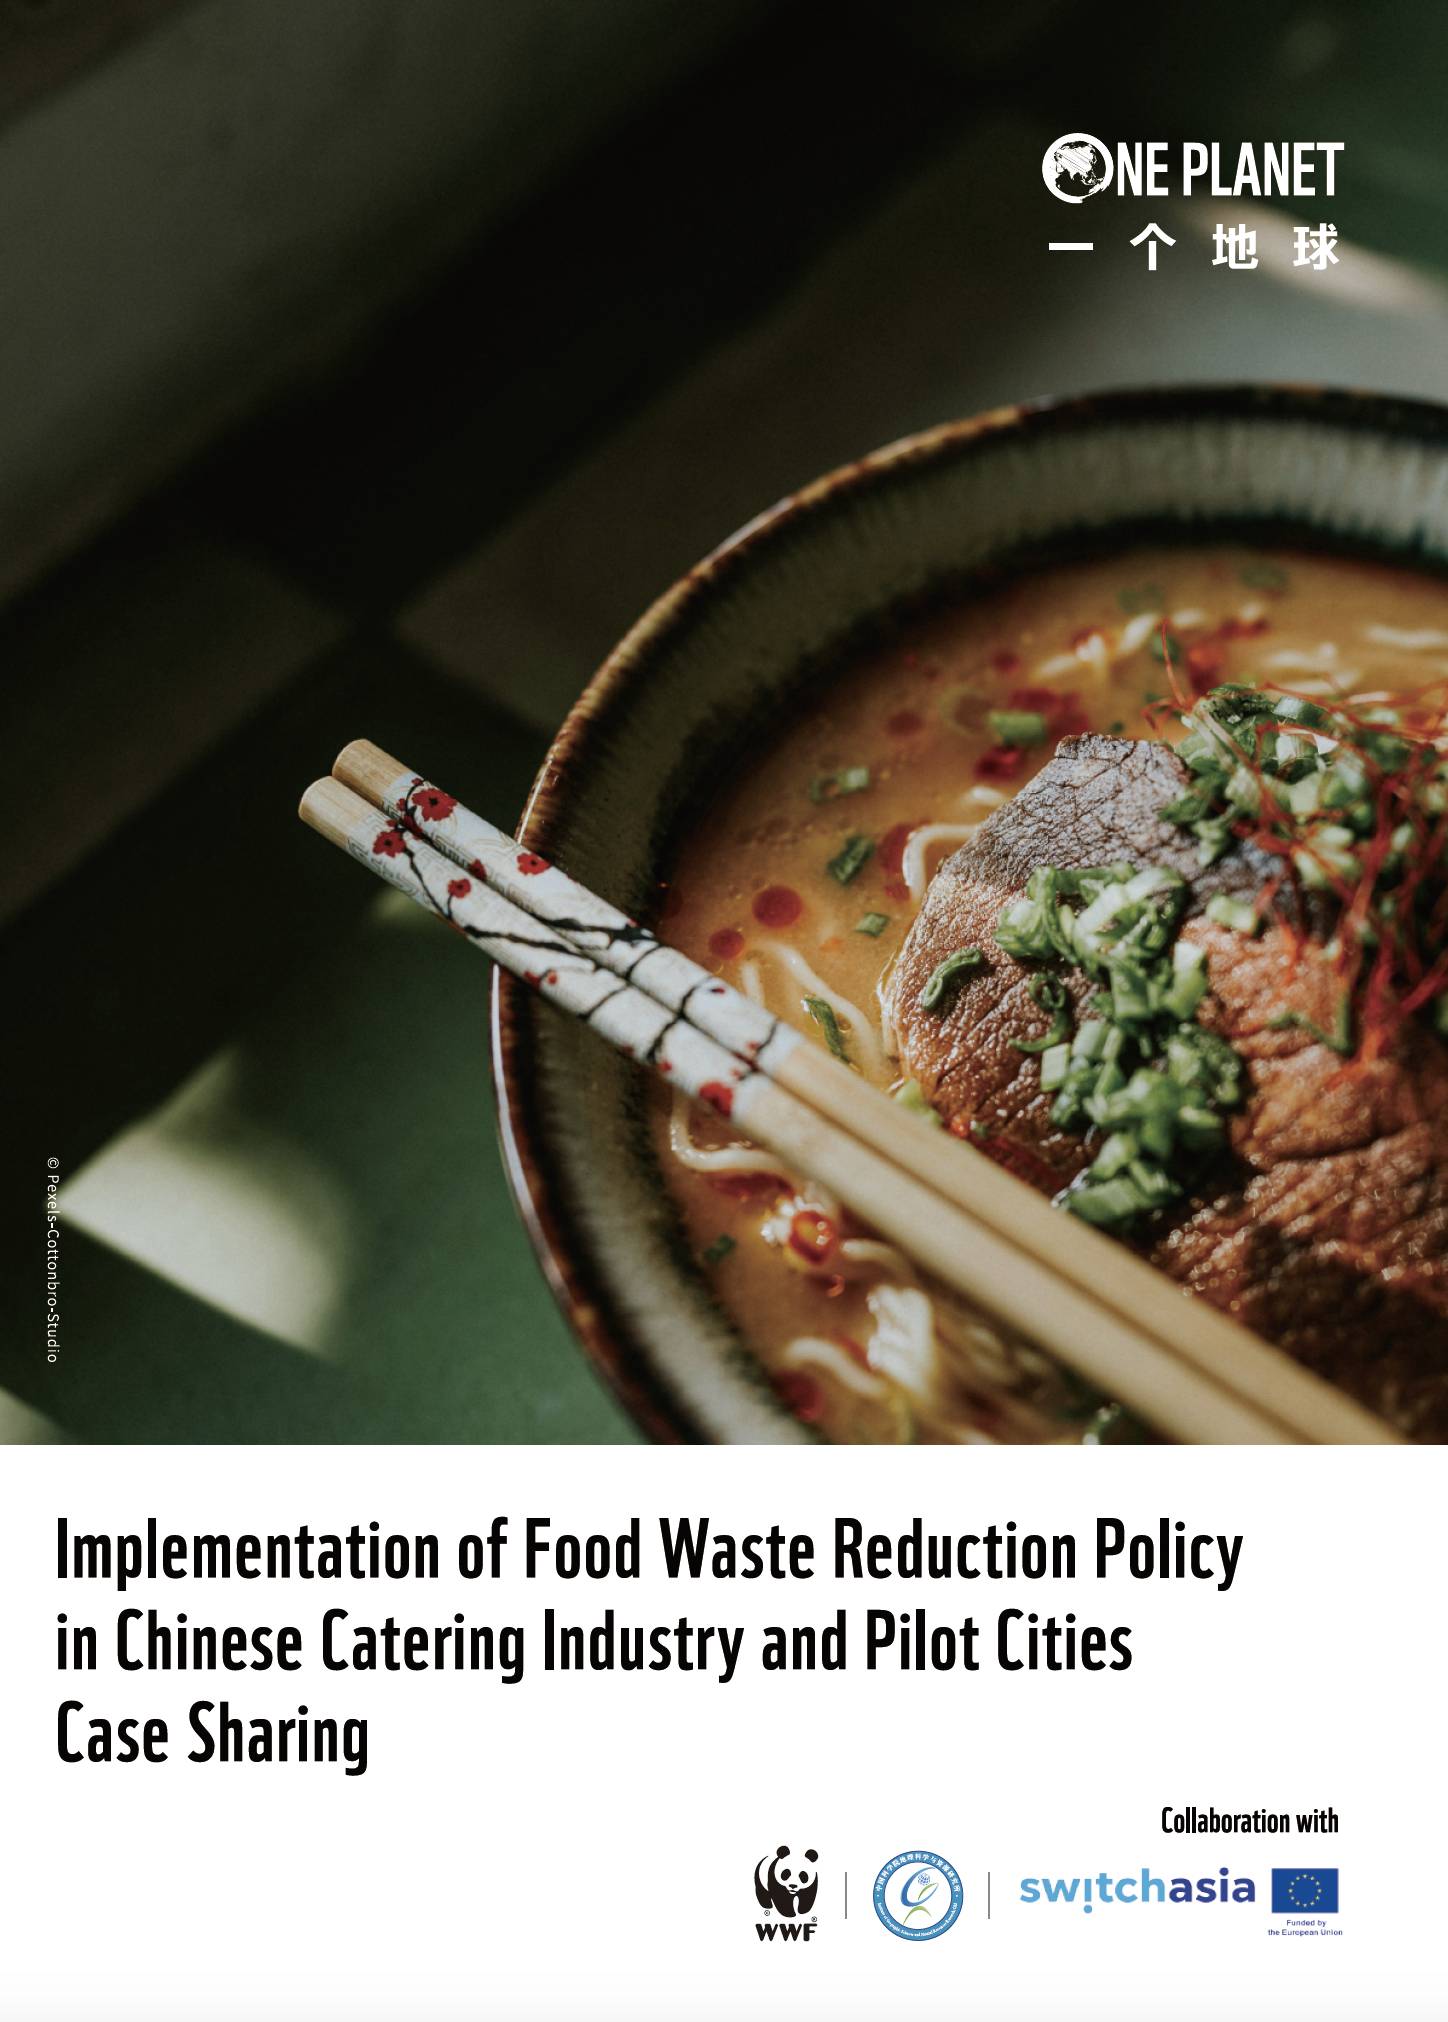 Implementation of Food Waste Reduction Policy in Chinese Catering Industry and Pilot Cities Case Sharing